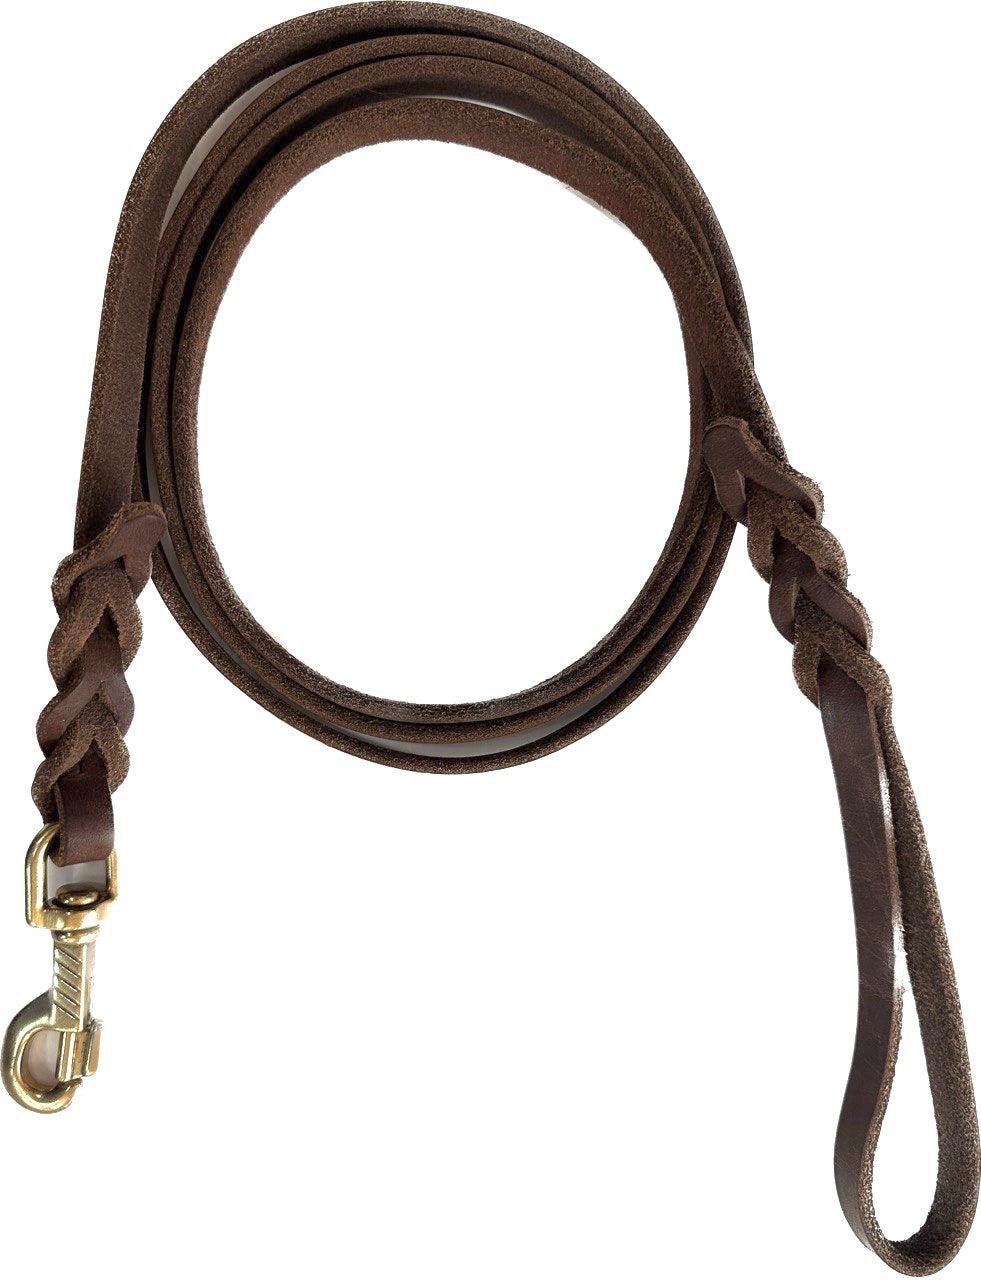 Leather Leash with Brass Hardware and Attractive Braided Finishes 6' x 5/8"